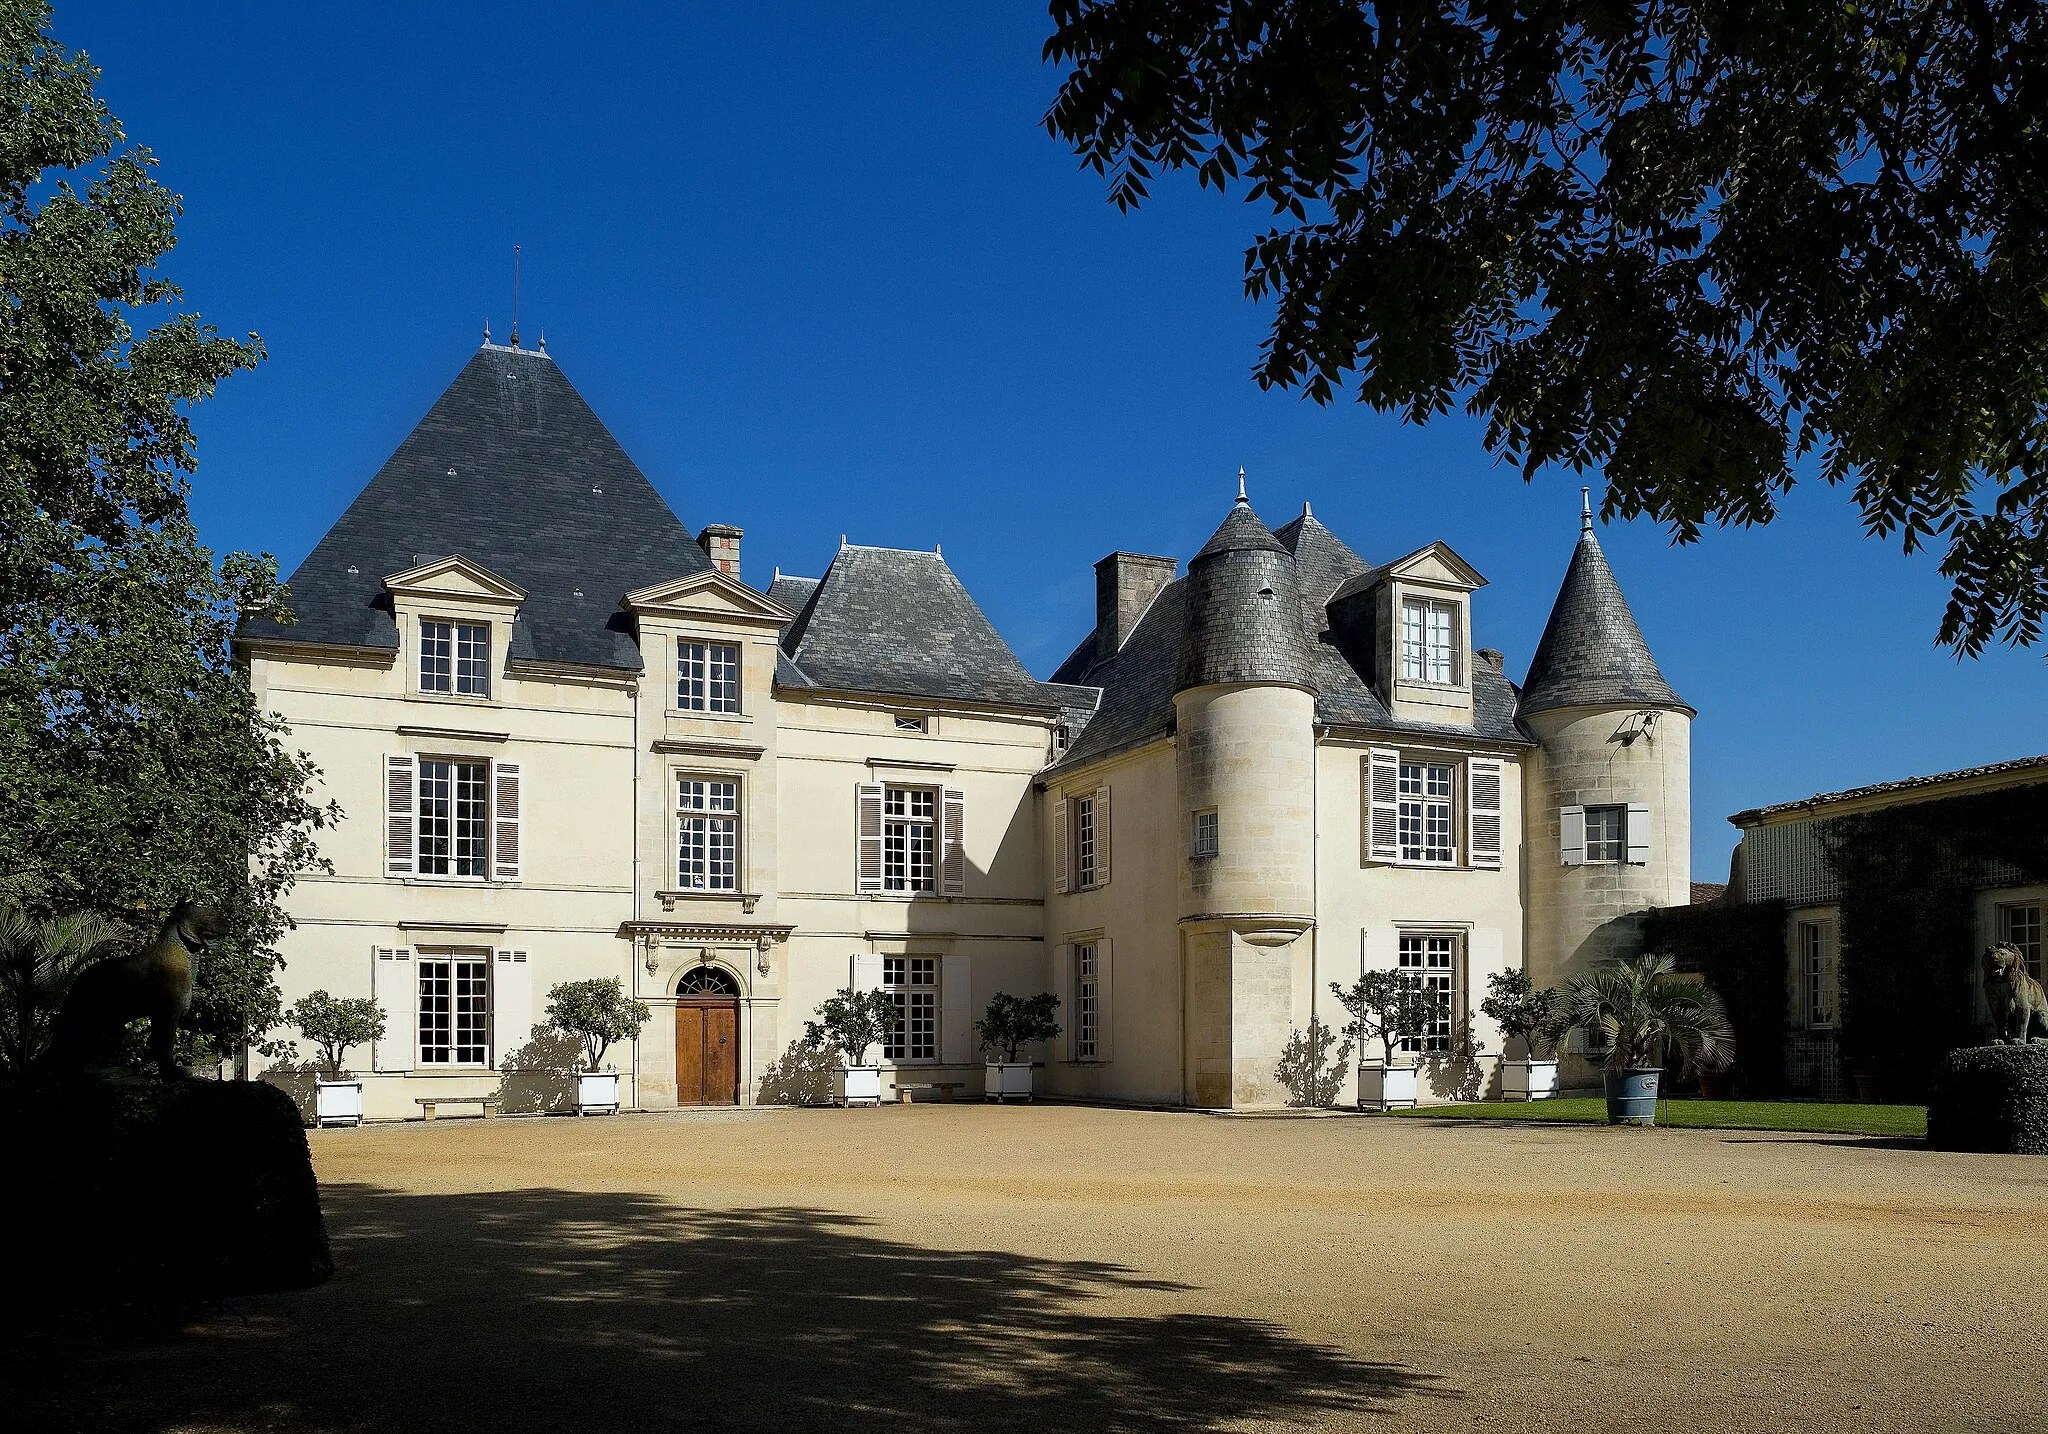 Photo showing: Image of the exterior of the Bordeaux wine estate Chateau Haut Brion.